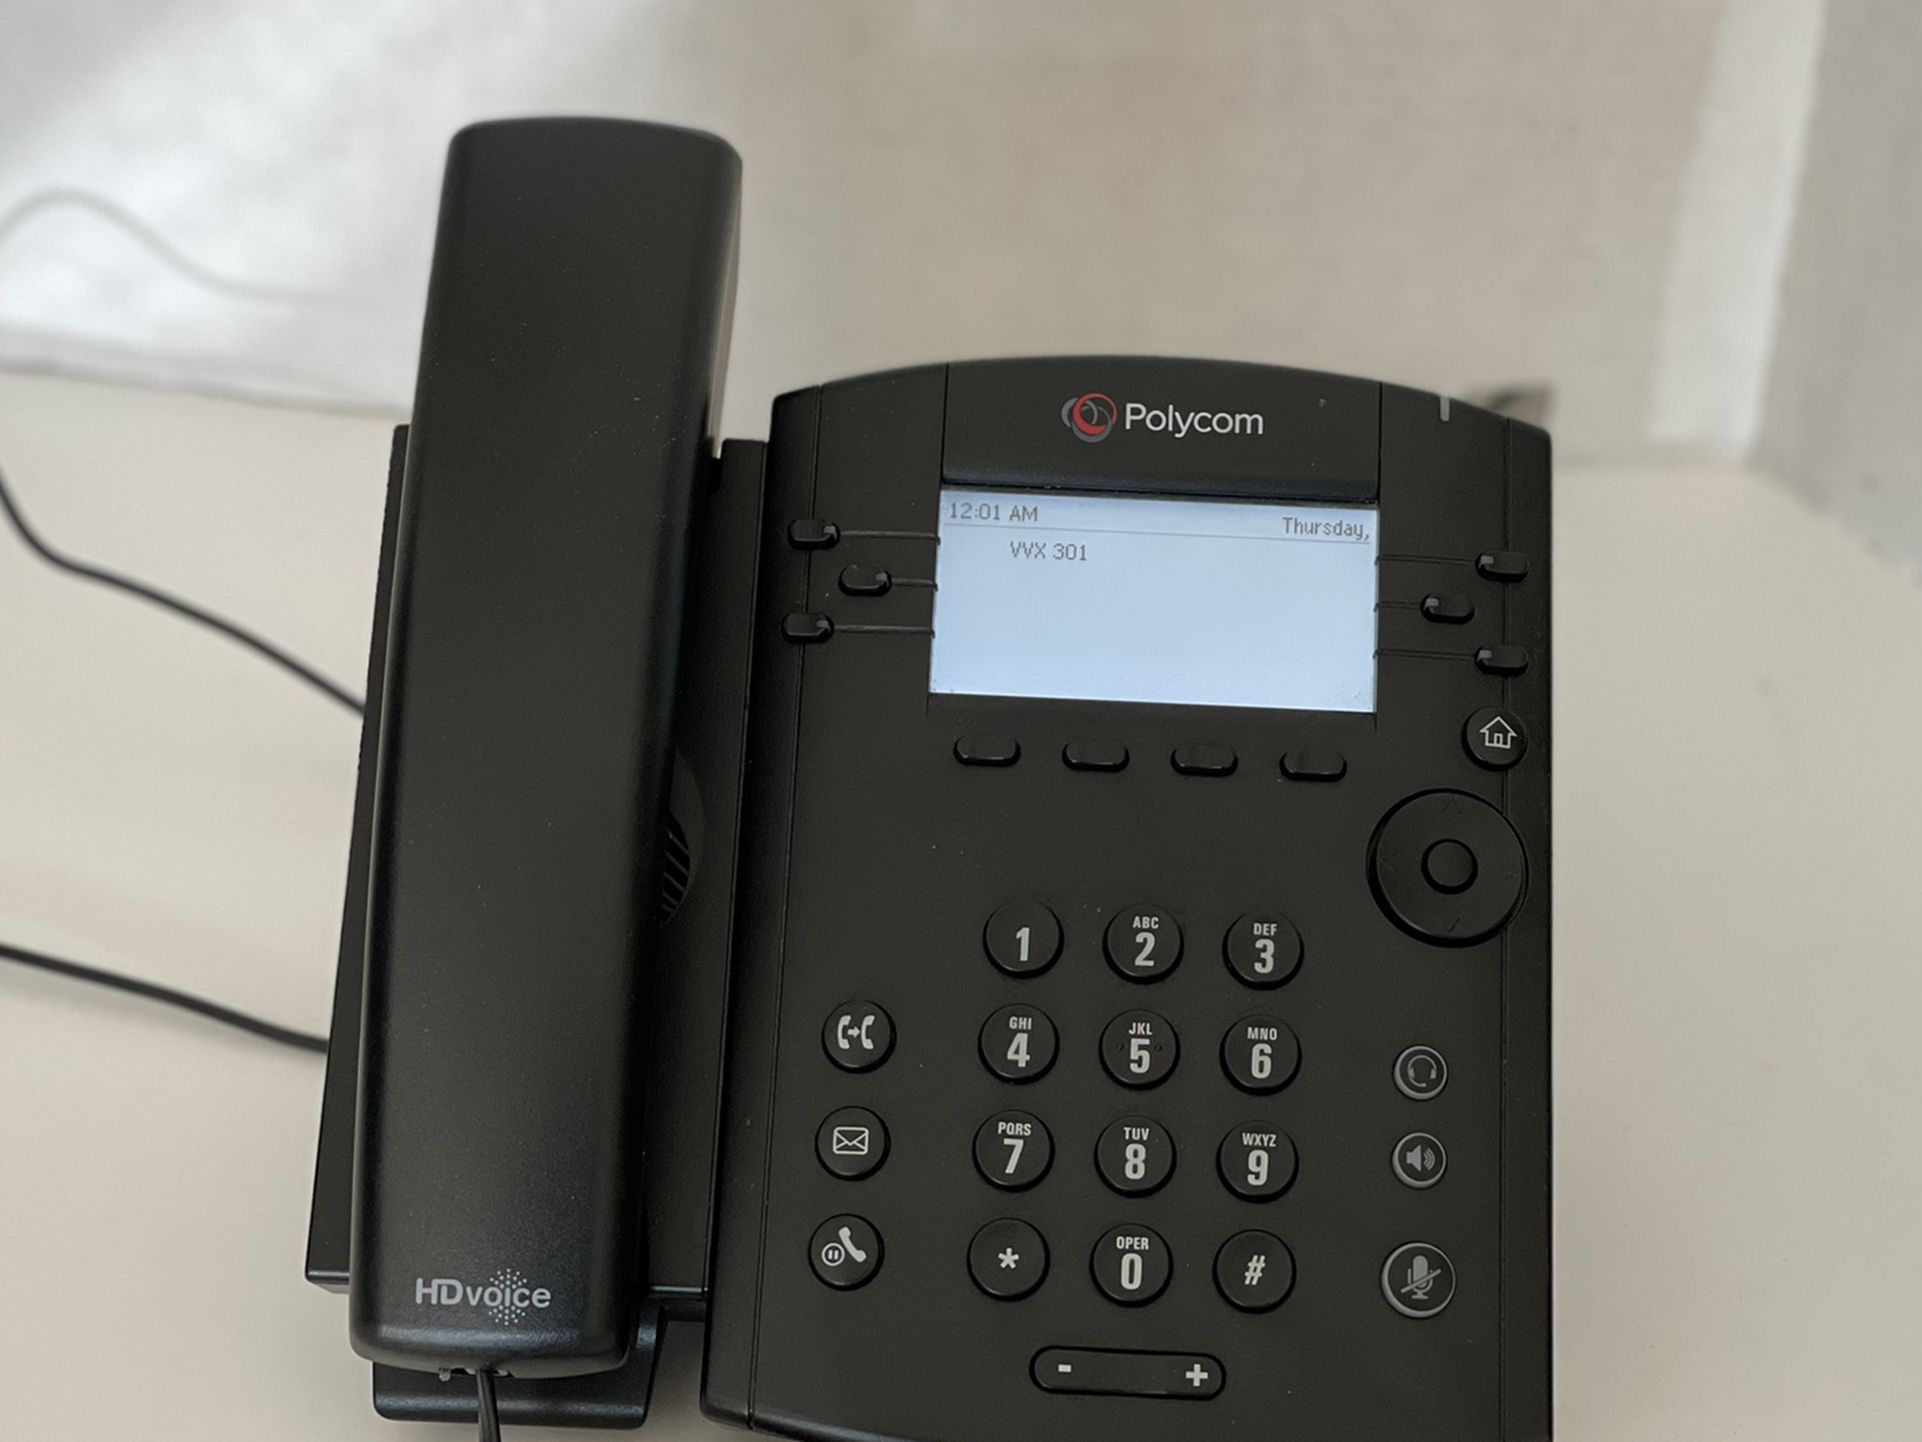 Polycom VVX 301 Corded Business Media Phone System - 6 Line PoE - 2200-48300-001 - AC Adapter (Included)